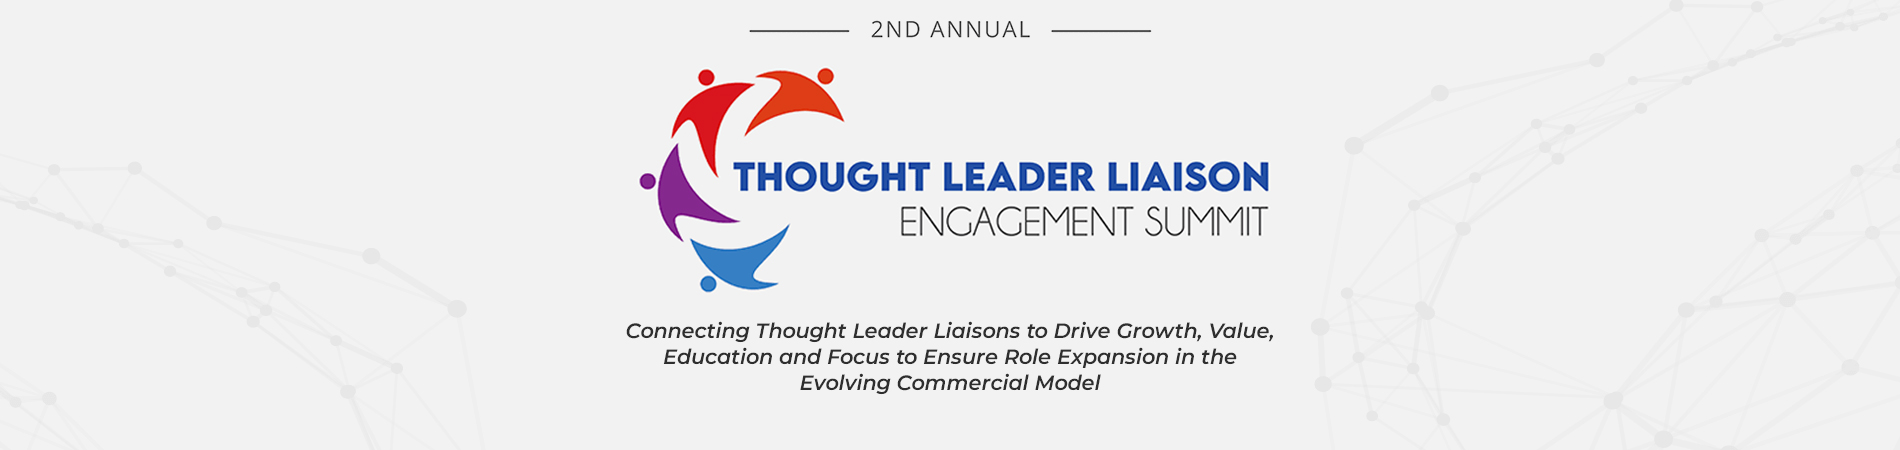 2nd Annual Thought Leader Liaison Engagement Summit